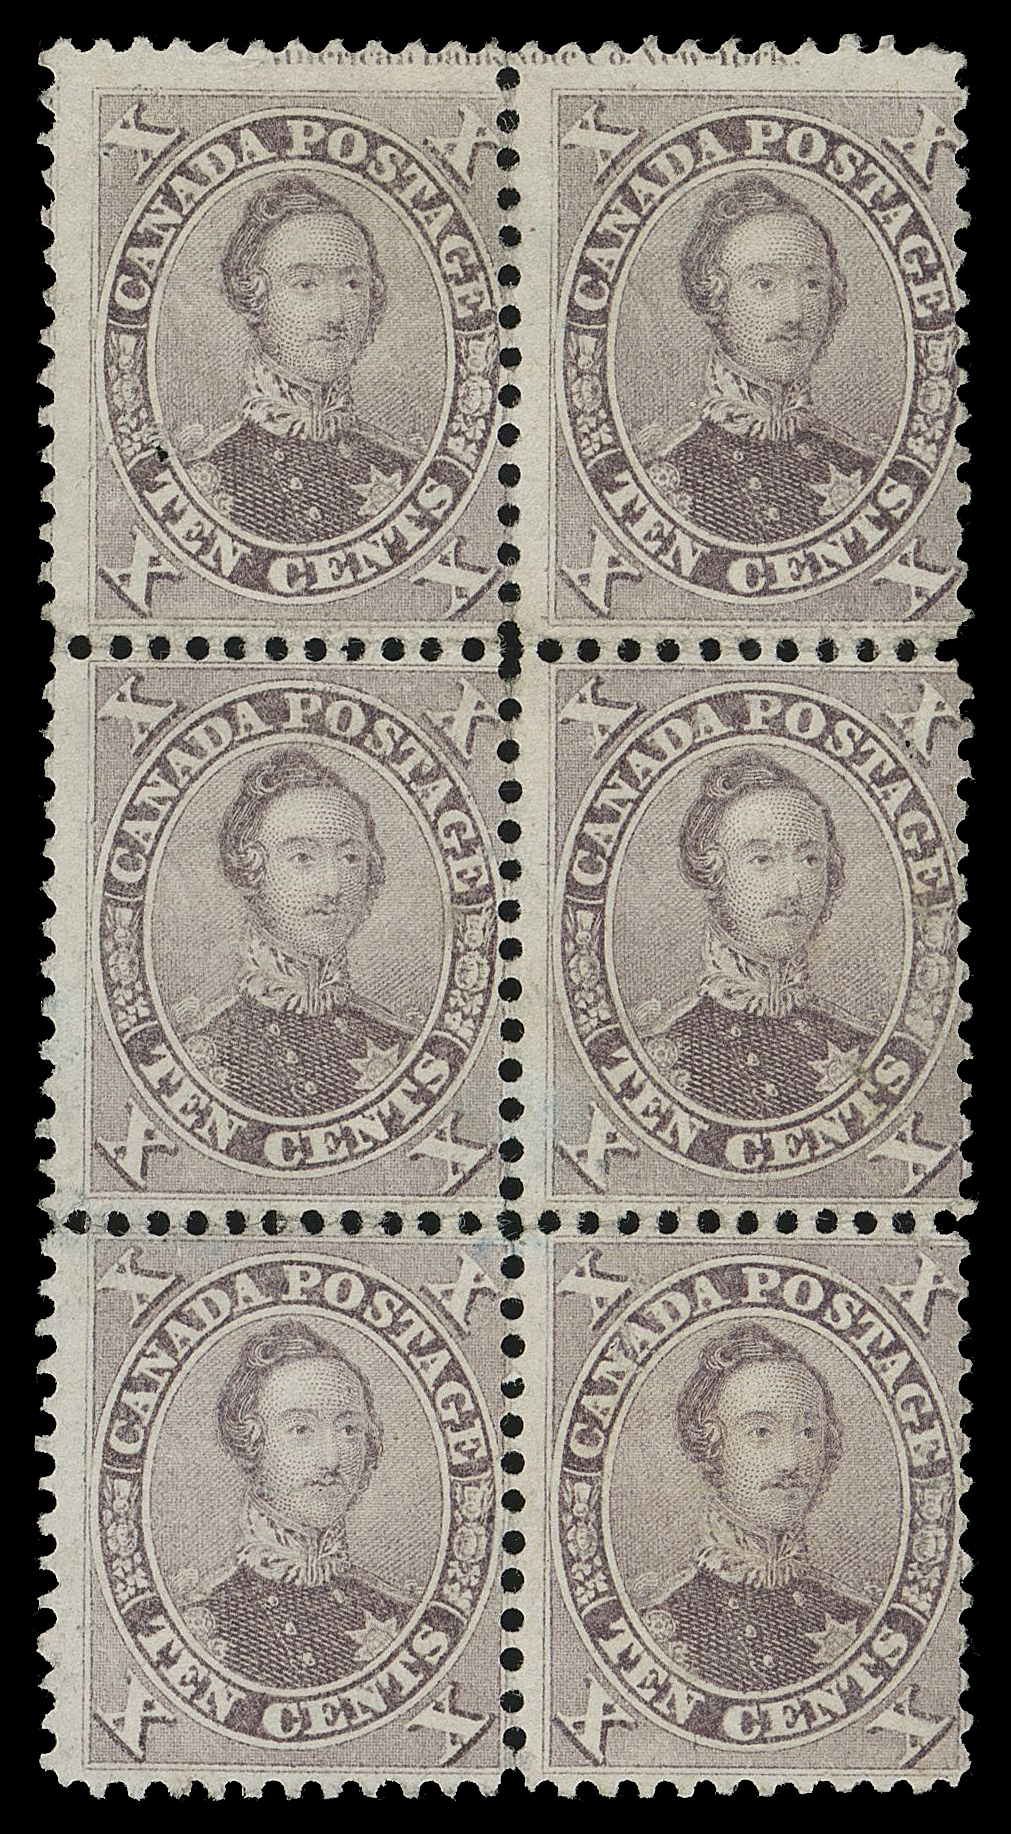 SIX PENCE AND TEN CENTS  17, 17iv,An unused block of six (2x3) showing ABNC imprint captured in margin at top; minor flaws include pinholes, a diagonal crease on lower pair and slight soiling, still a very rare plate imprint multiple of Fine appearance.

The "String of Pearls" (Position 3, top right) plate variety is subtle and hard to see on this bright shade. Shows supporting constant positional dot in frame above upper left "X" and shows ABNC imprint running across margin at top.

Provenance: Fred Jarrett Canada 1859-1864, Sissons Sale 169, December 1959; Lot 287
Stanley Cohen, Cavendish Auctions, October 1986; Lot 81
The "Carrington" Collection of Canada 1851-1864, Matthew Bennett Auctions, June 2002; Lot 3354

Other comparable unused multiples larger than a block of four, are a mint horizontal strip of five and a plate imprint block of eight. Remarkably enough, both multiples were part of the Brigham collection and were sold in Part I and Part II respectively.